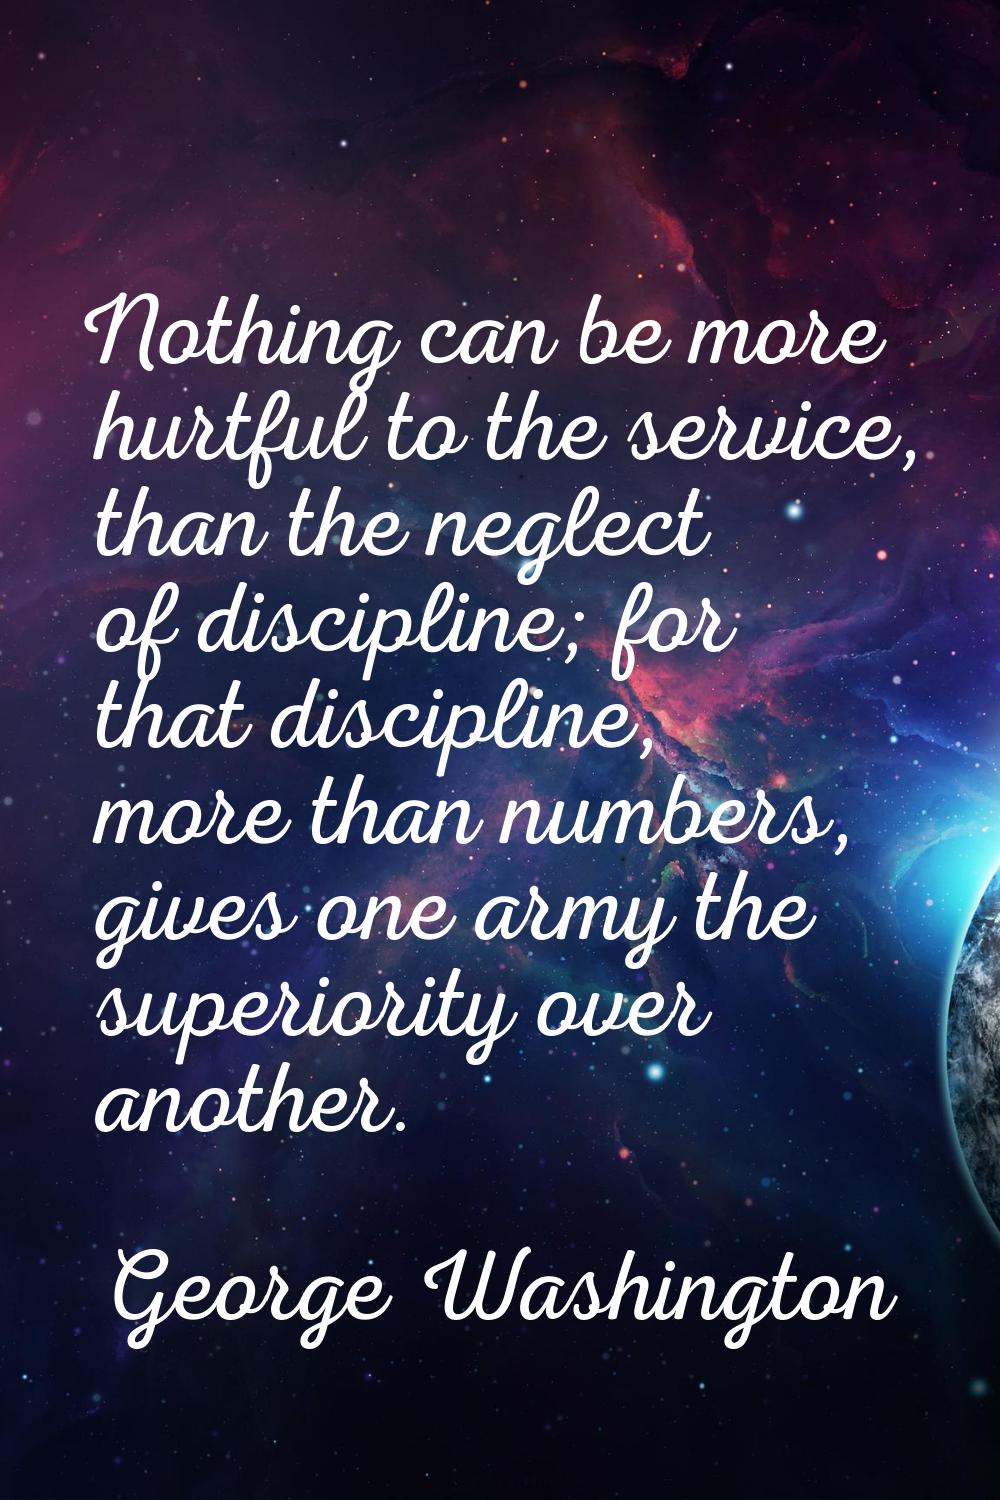 Nothing can be more hurtful to the service, than the neglect of discipline; for that discipline, mo